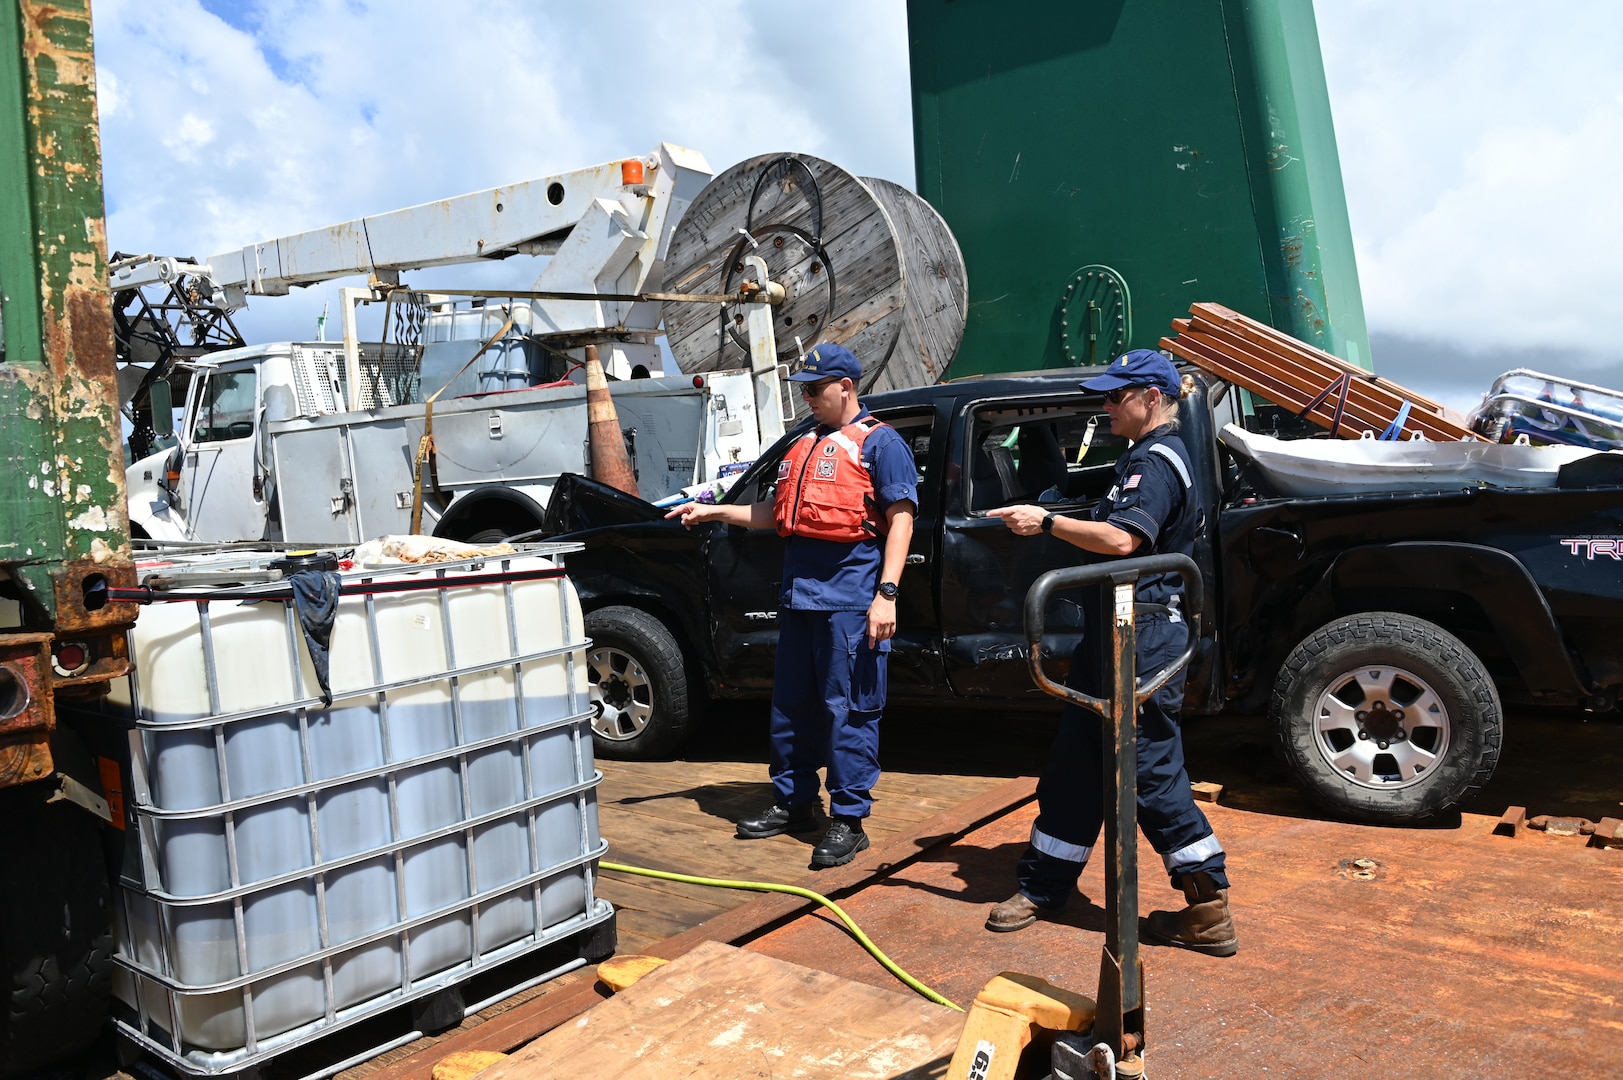 Coast Guard Incident Commander Lt. Cmdr. Christopher O'Conner is briefed by Chief Stefanie Daley, a marine science technician, on contained oil recovery operations on the Bonnie G off Cyril E. King Airport, St. Thomas, Oct. 14, 2023. The Bonnie G, a 195-foot Vanuatu-flagged “ro-ro” cargo vessel that grounded on Oct. 4 during Tropical Storm Philippe. (Coast Guard photo by Petty Officer 1st Class Nicole J. Groll)